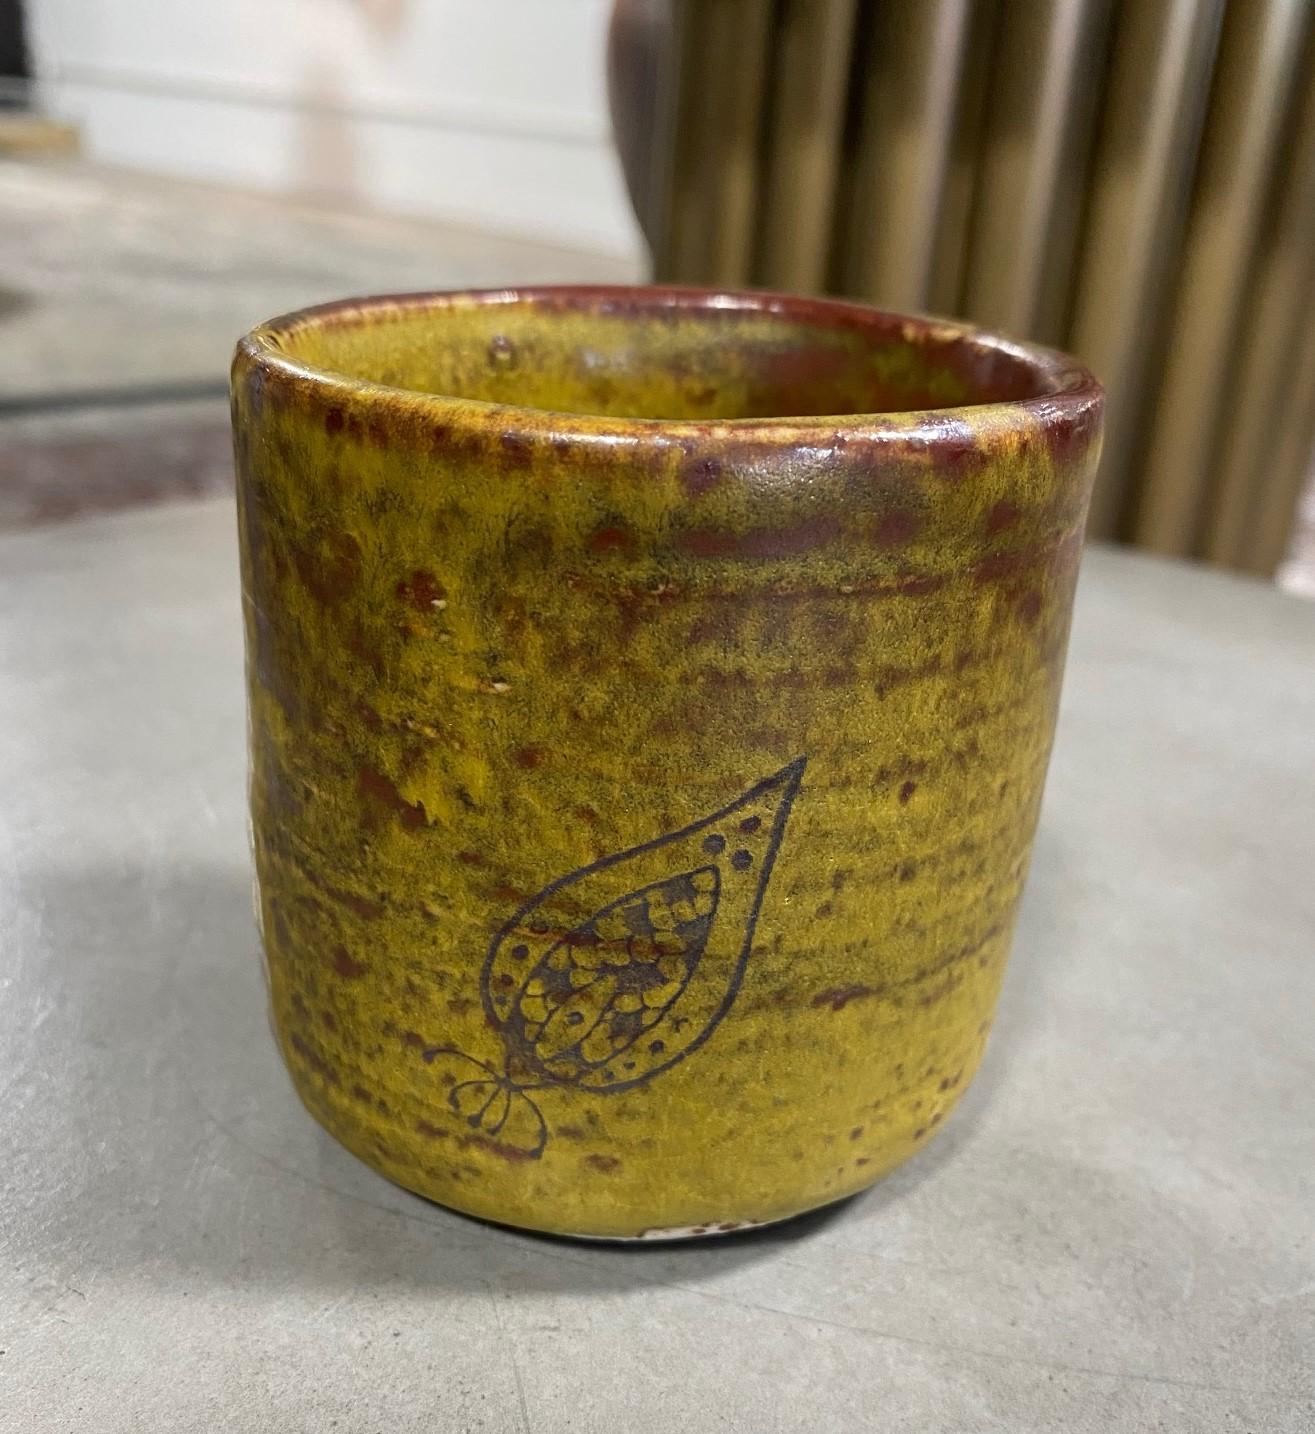 A beautiful Japanese yunomi teacup, richly glazed and featuring the artisan's signature creature figure painted on the cup.

This work (along with a second yunomi - clearly from the same artist. Please see the last image) came from a collector of